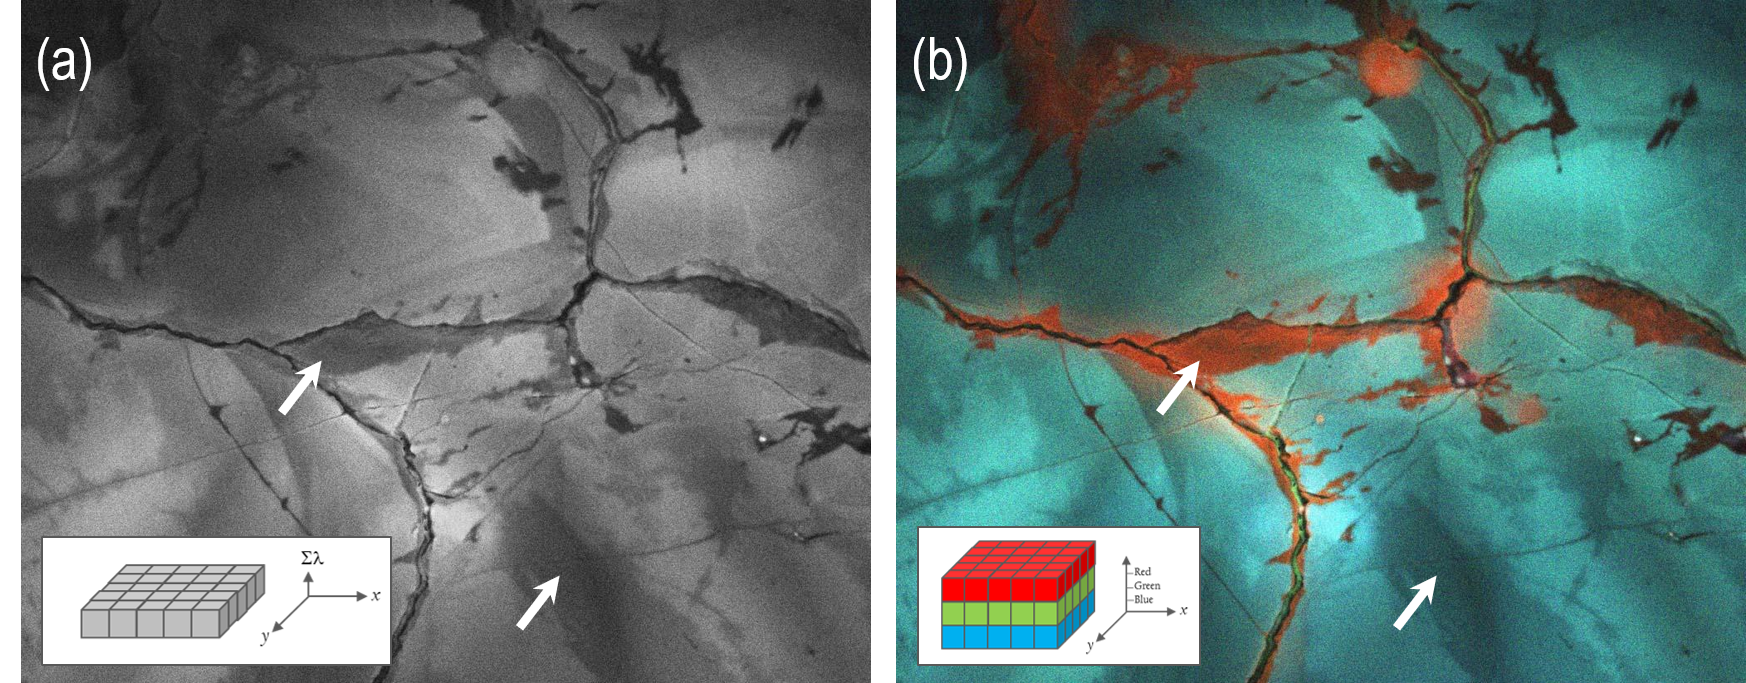 a) Unfiltered and b) color cathodoluminescence images of the same region of igneous quartz (plutonic granite); inset schematics represent the mode of data acquisition with the color image formed using three spectral components corresponding to red, green and blue wavelengths). The arrows indicate two regions of the mineral that, in an unfiltered CL image, appear equivalent. However, the additional spectral information available in the color image reveals that the two regions are distinctly different, reducing the risk of incorrect interpretation.